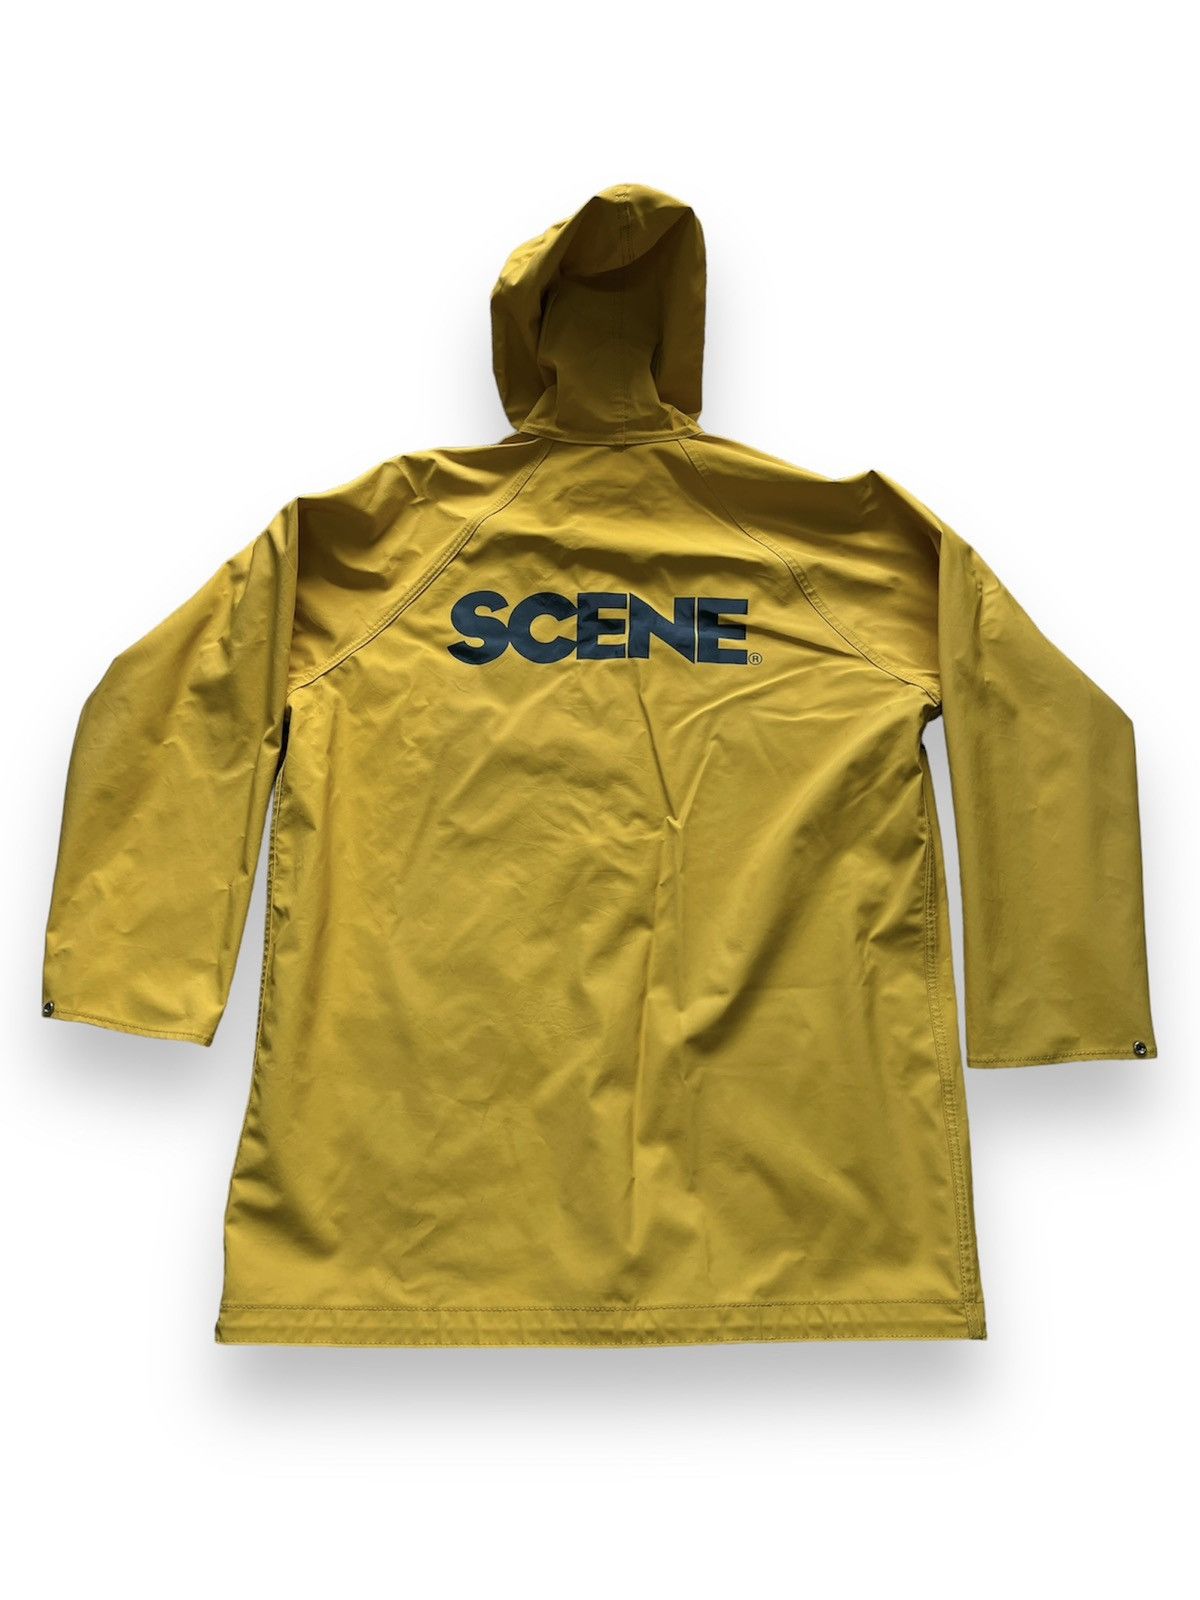 Outdoor Style Go Out! - Scene Reversible USA Parka Waterproof Jacket - 6